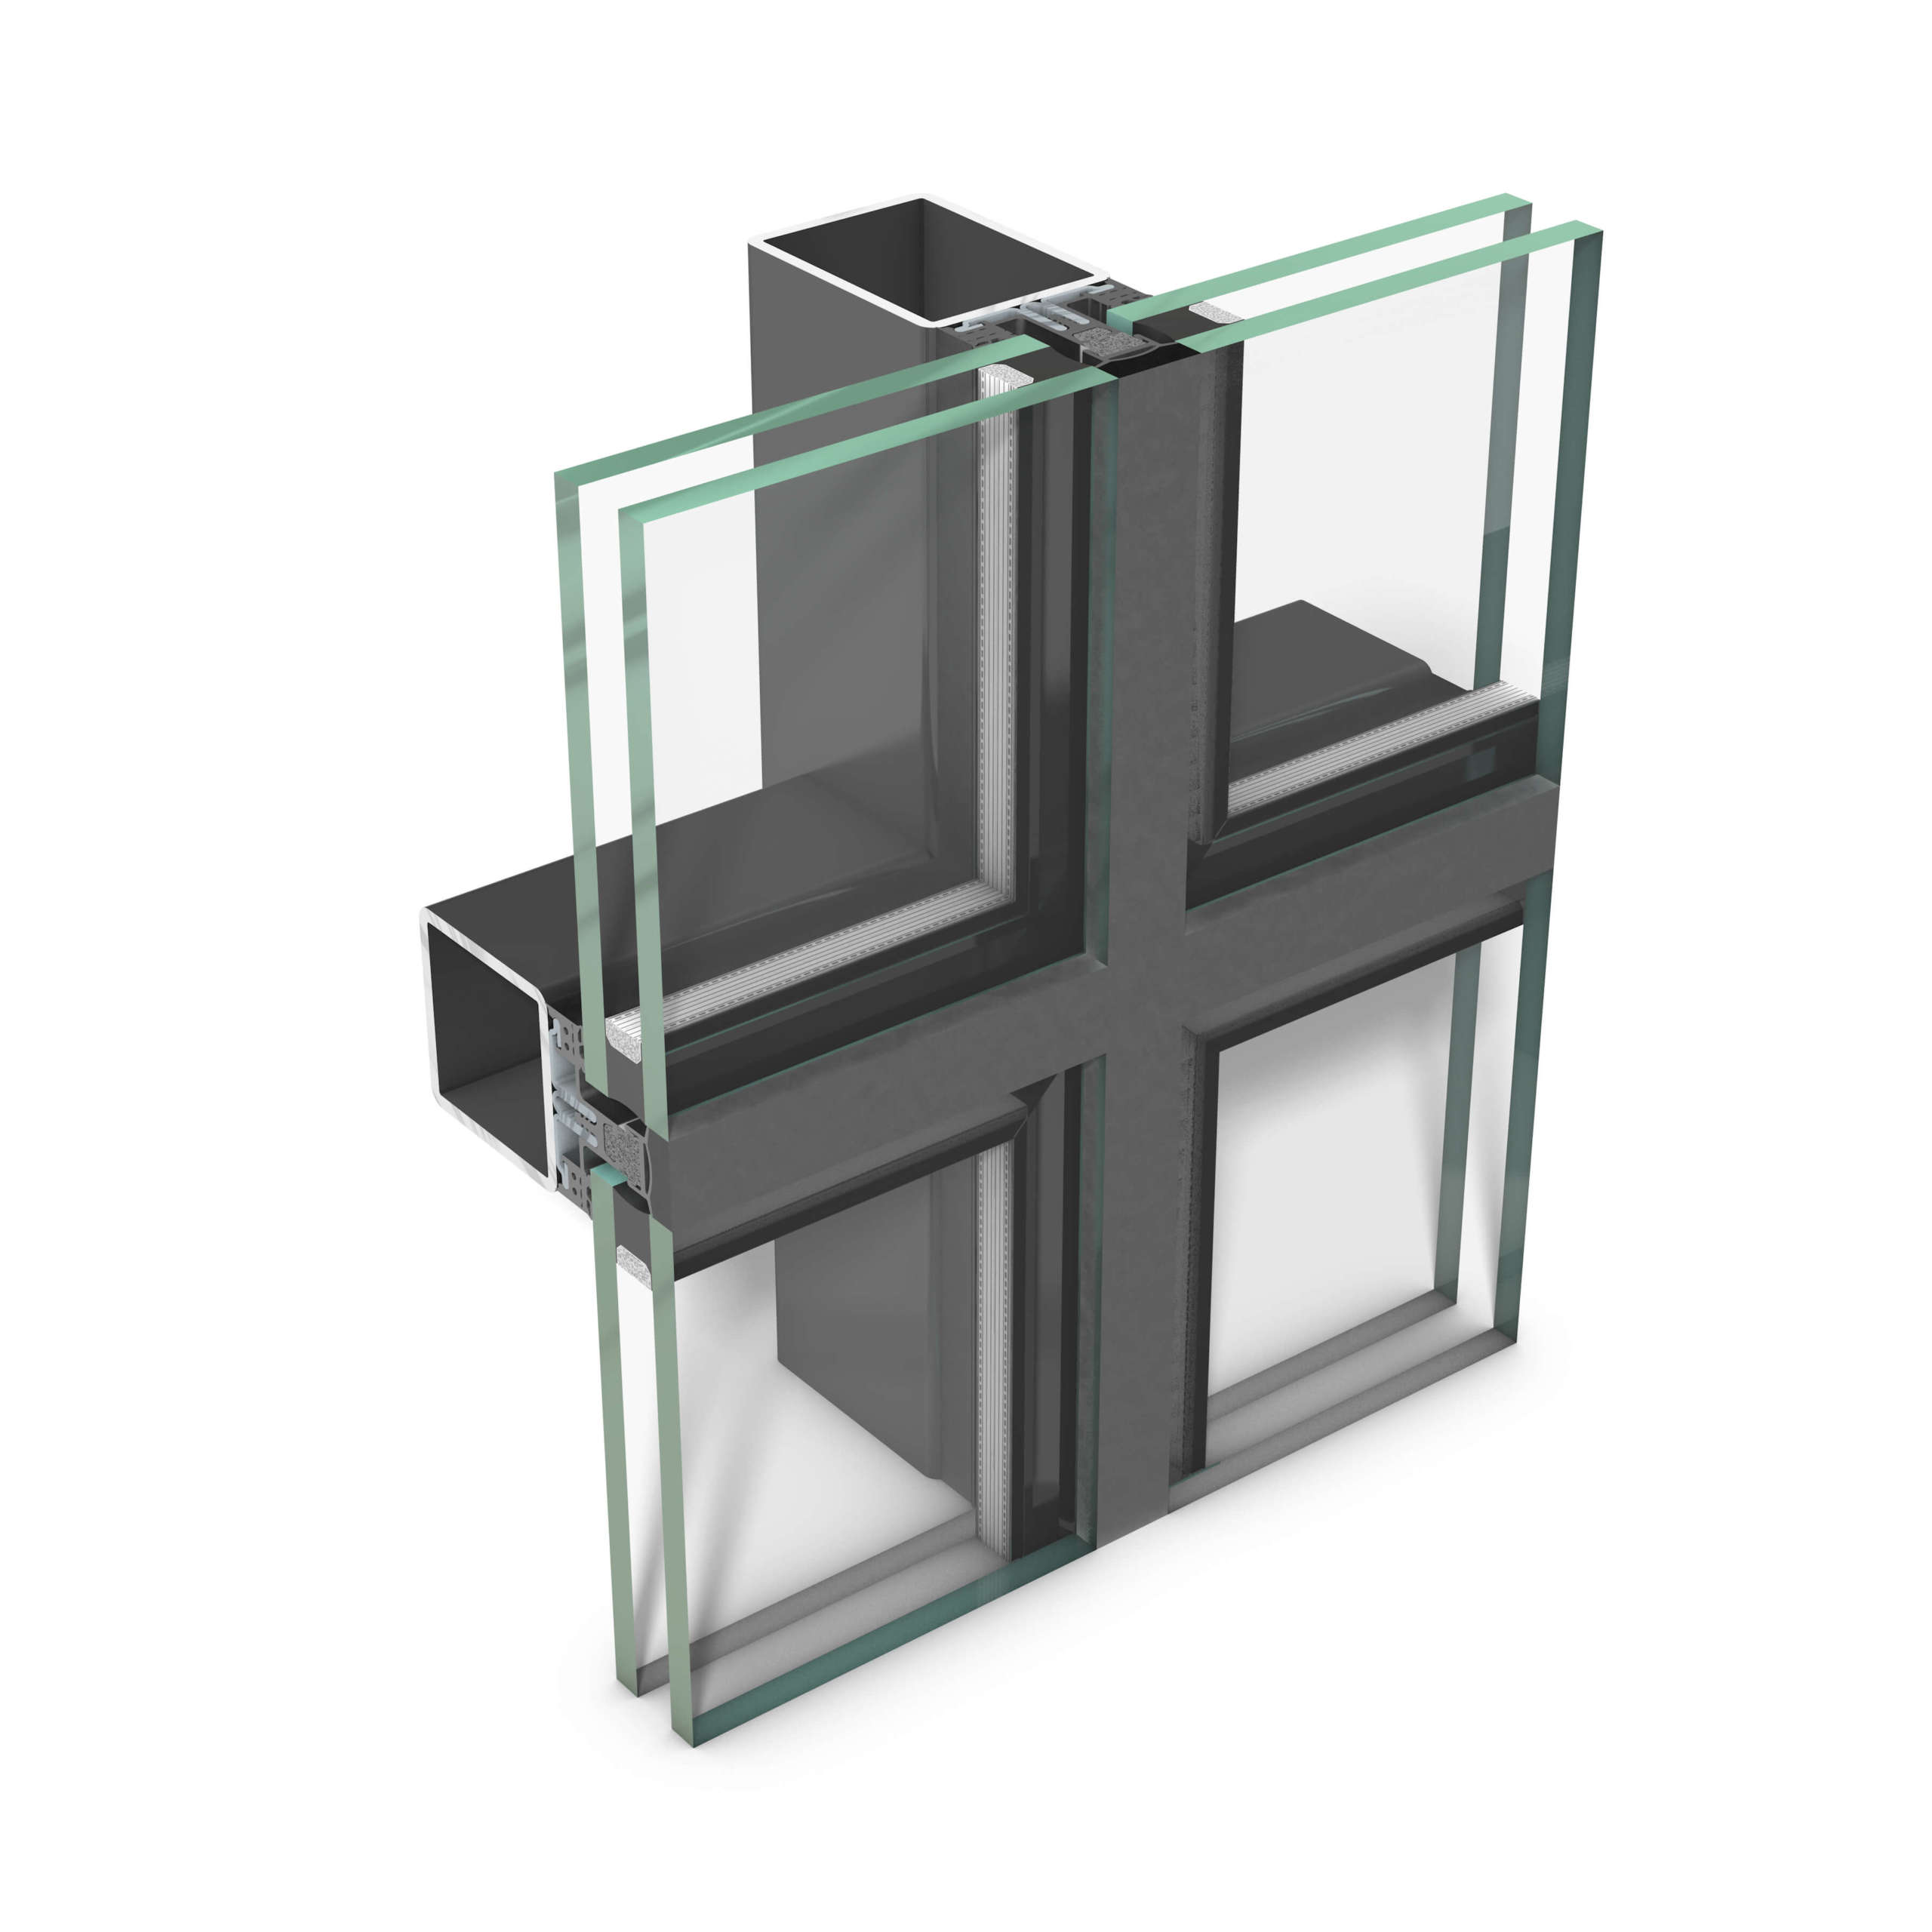 rp tec 55-1SG, all-glass curtain wall (structural glazing) serving as an add-on structure